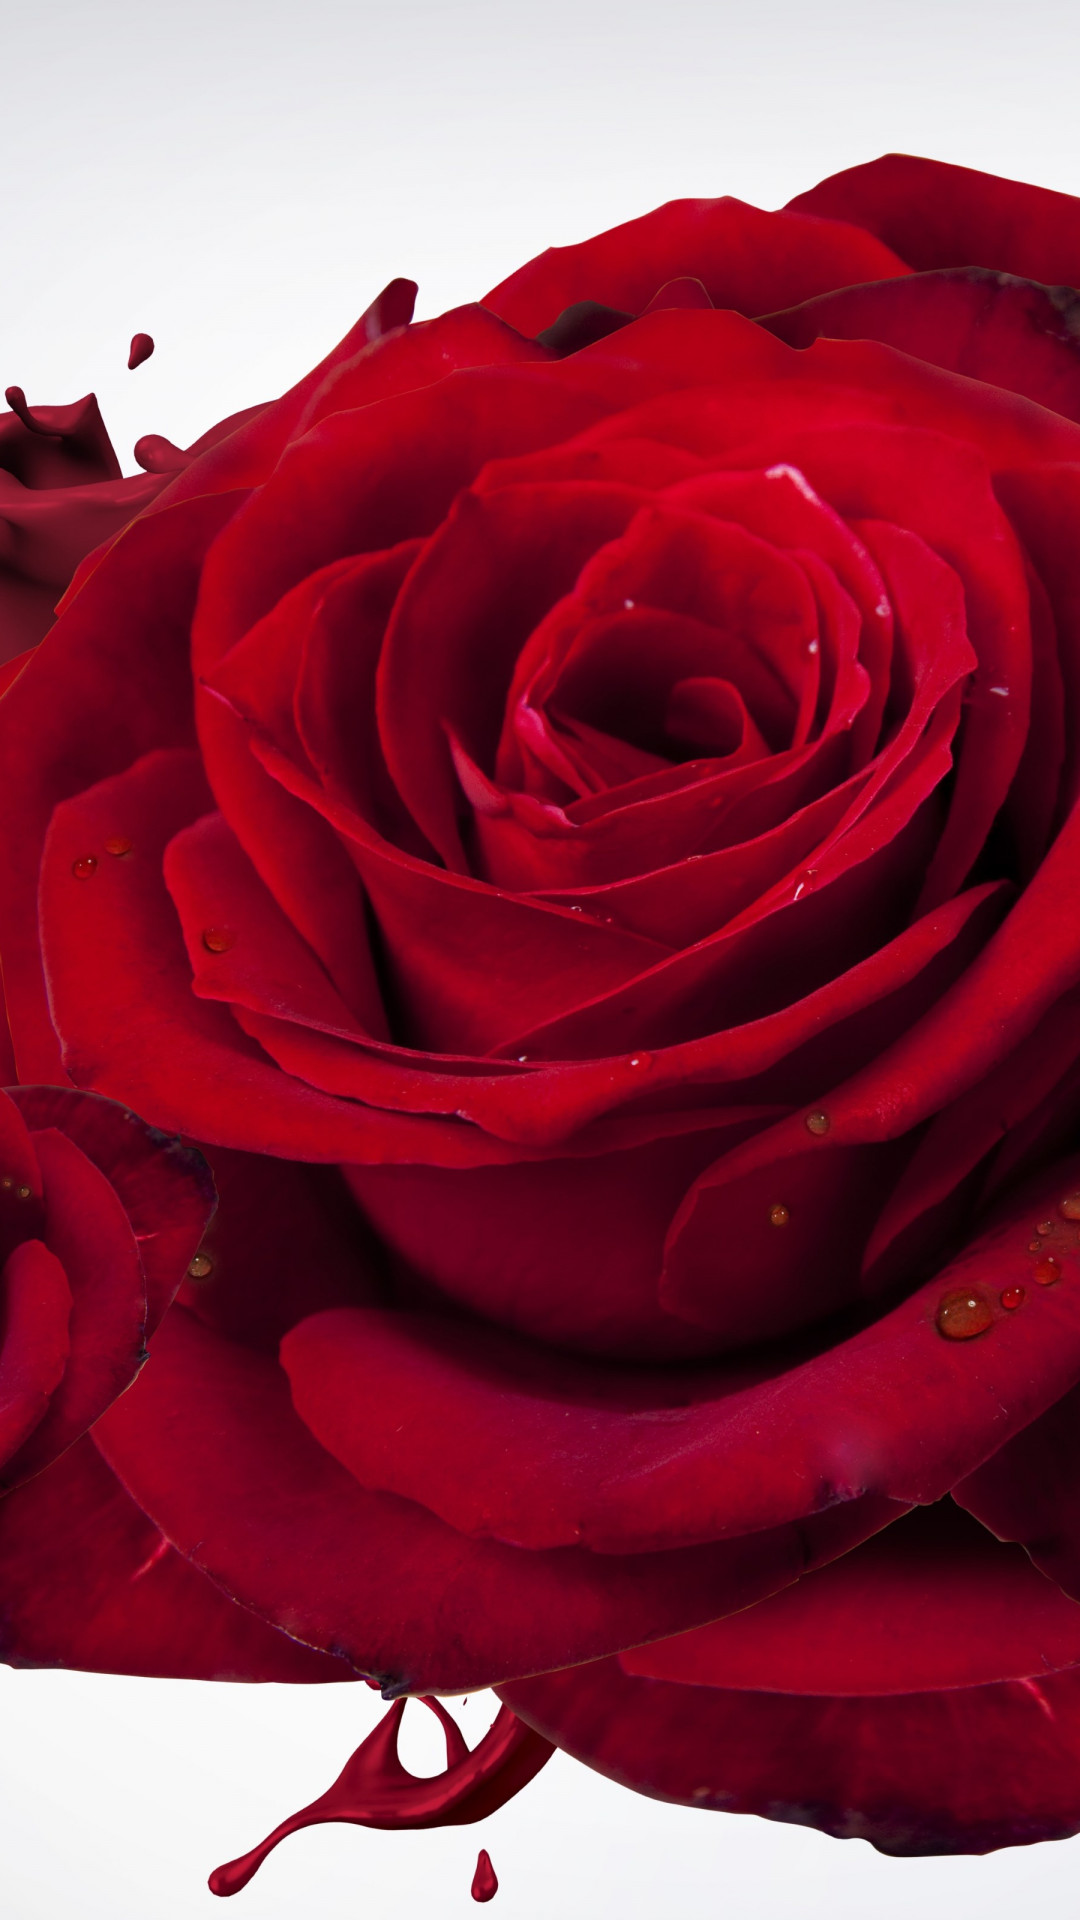 The most beautiful red roses wallpaper 1080x1920